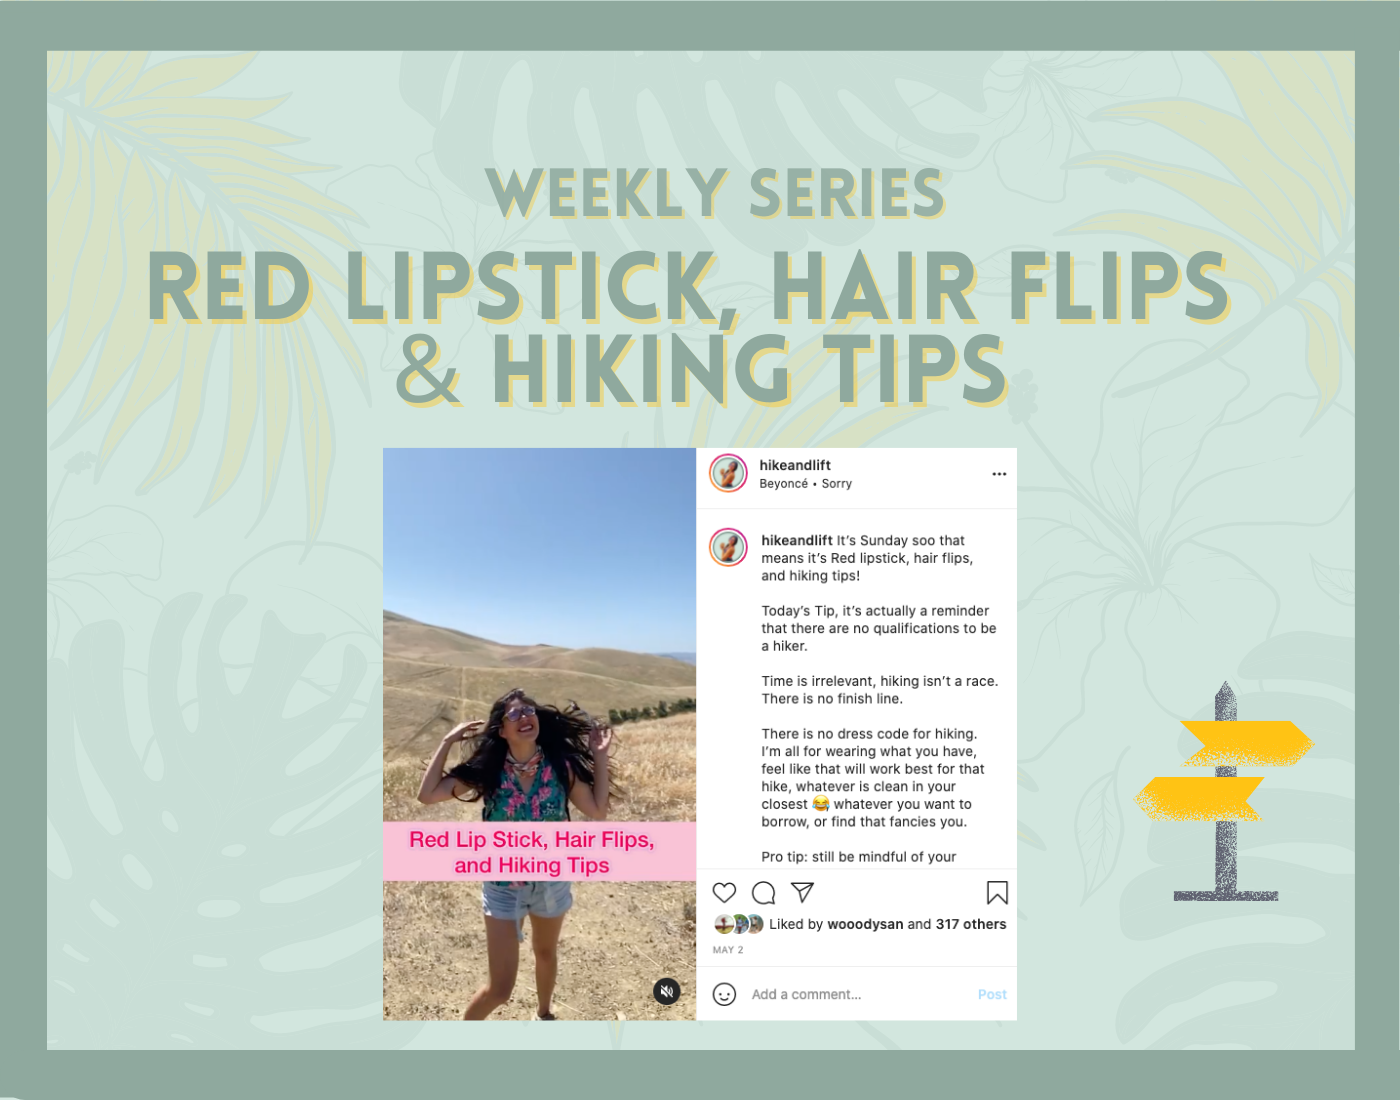 Red Lipstick, Hair Flips, and Hiking Tips Series & Looking for Sponsors